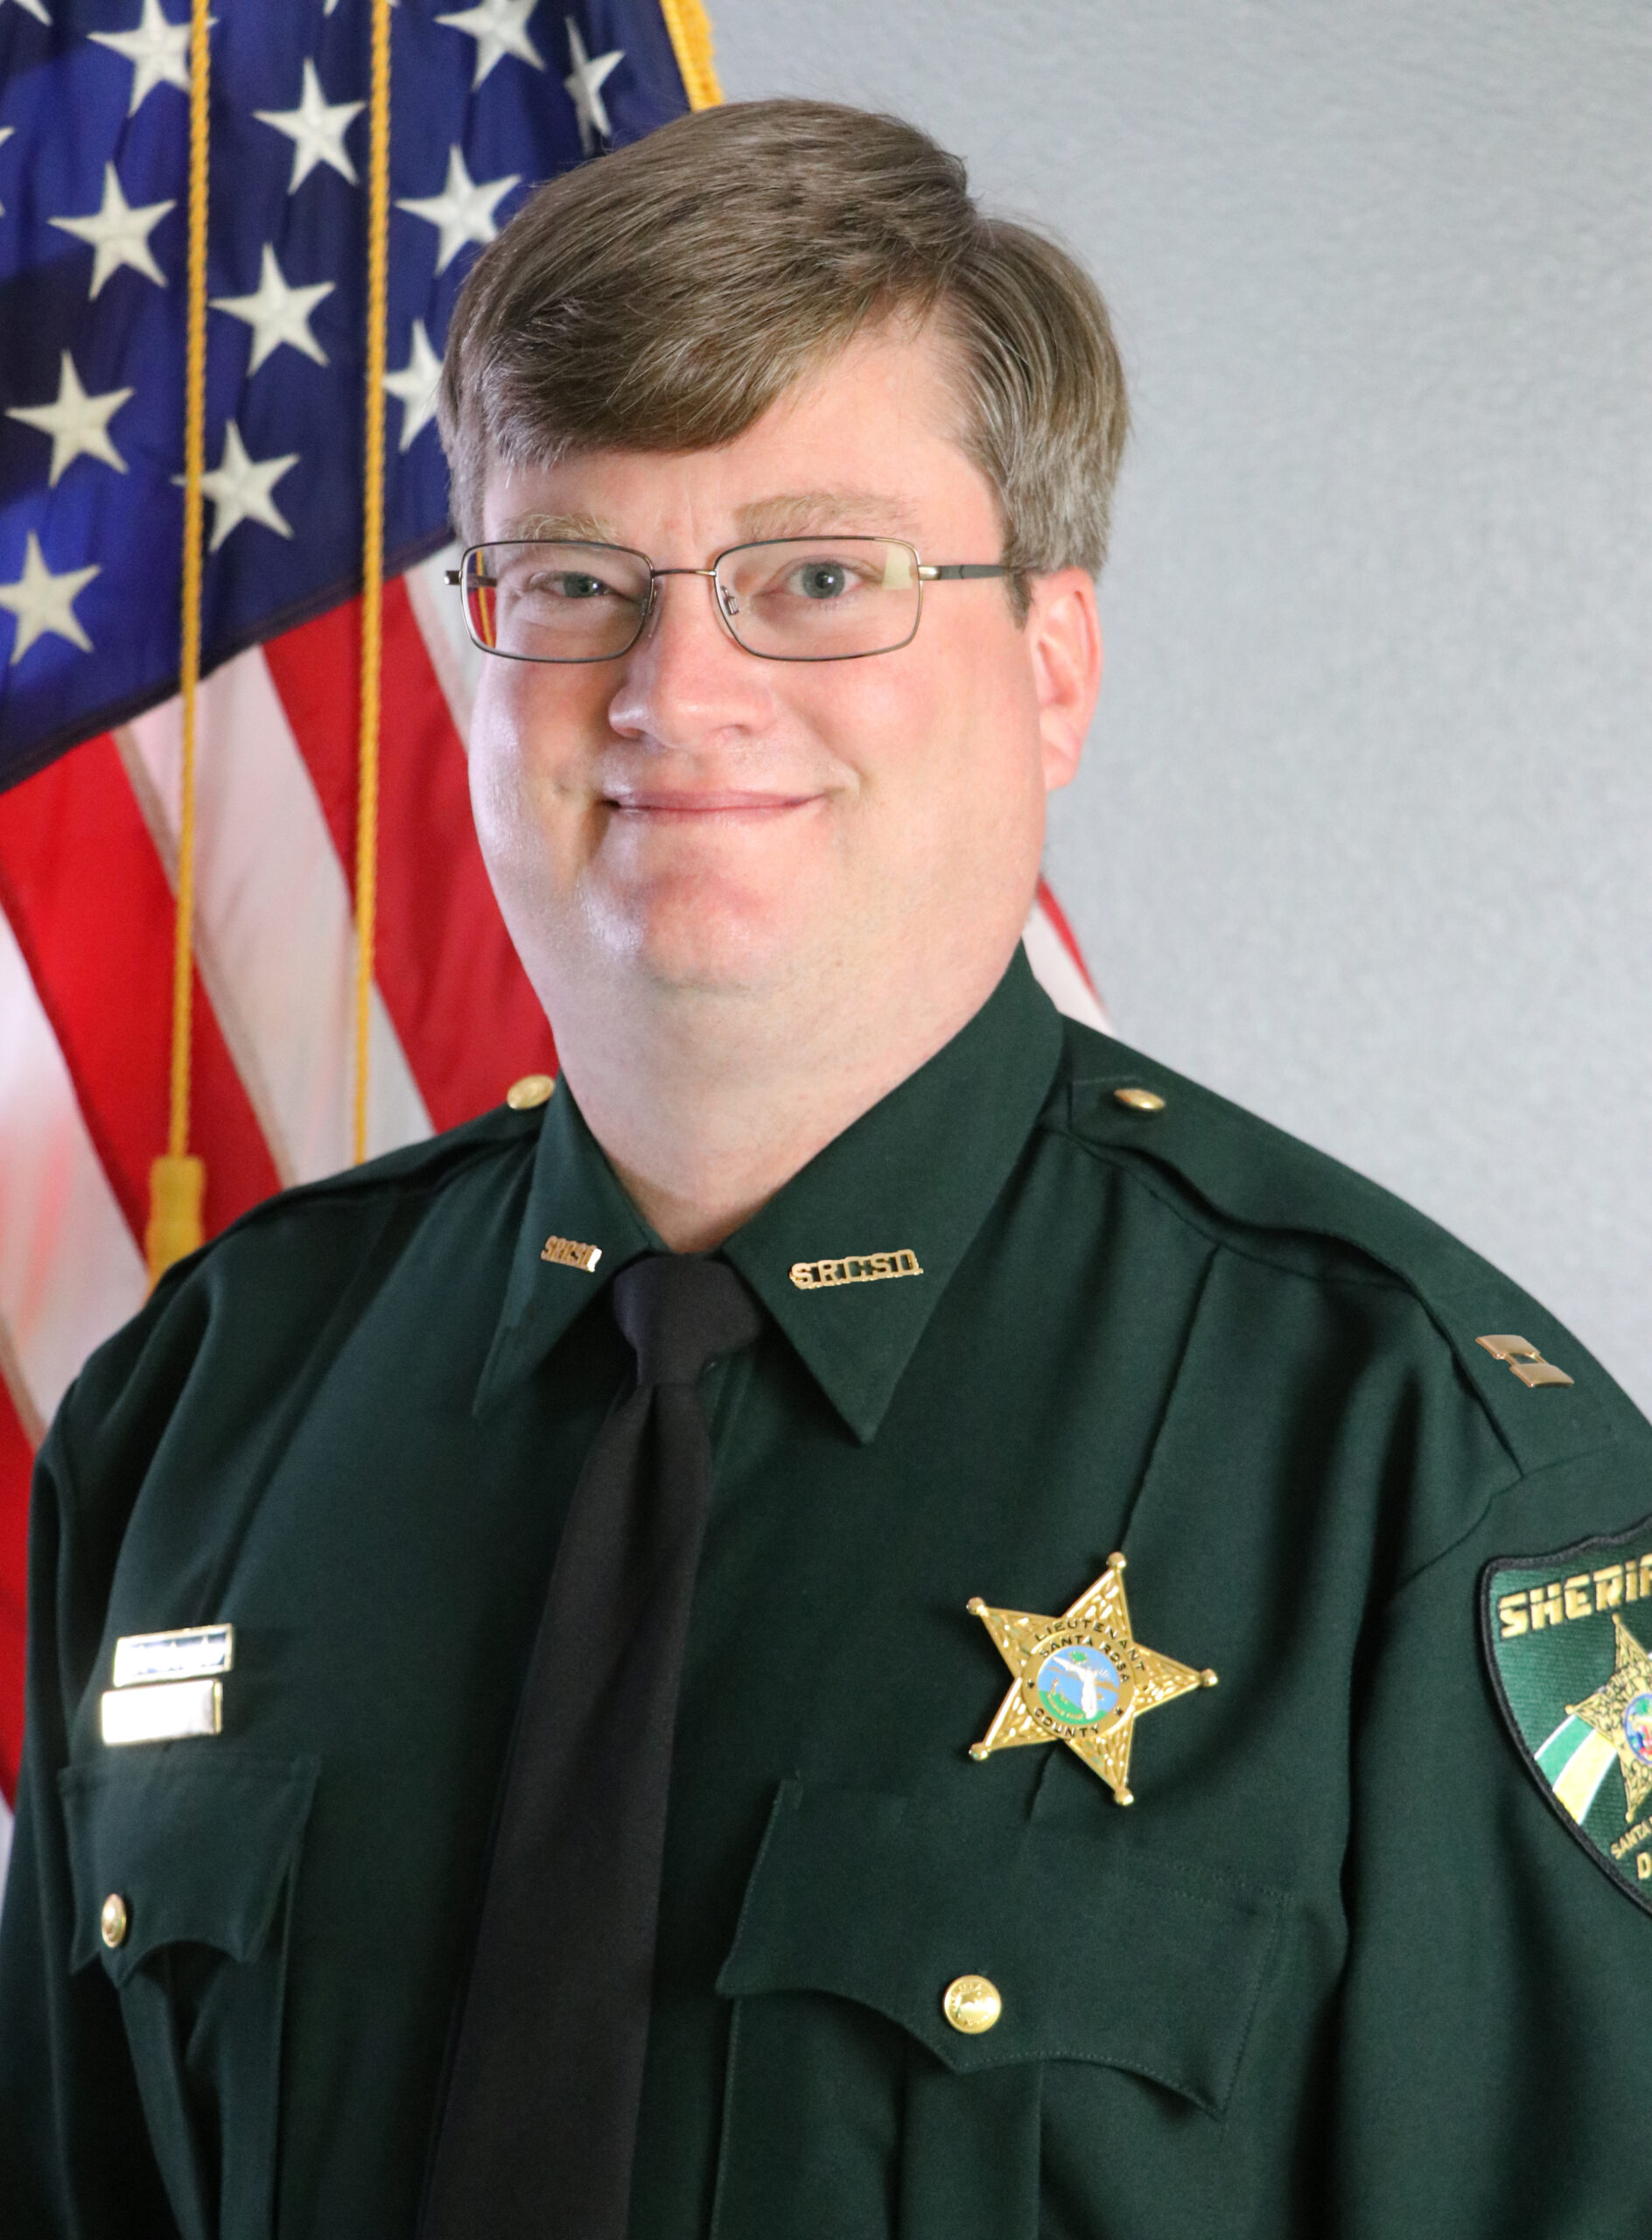 A sheriff in uniform smiling, standing in front of the american flag and another flag with a star emblem.